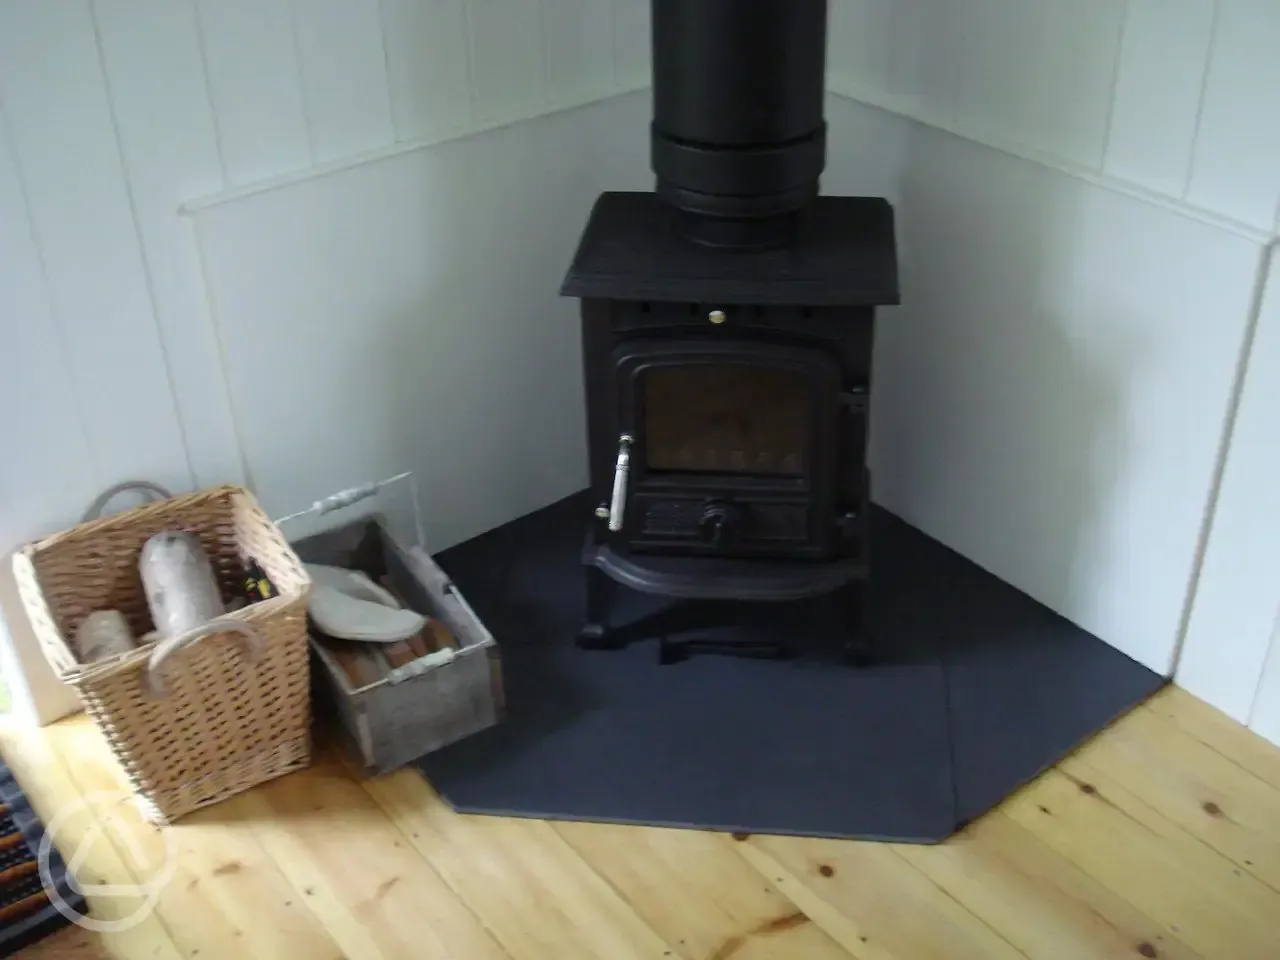 real wood burner with logs provided